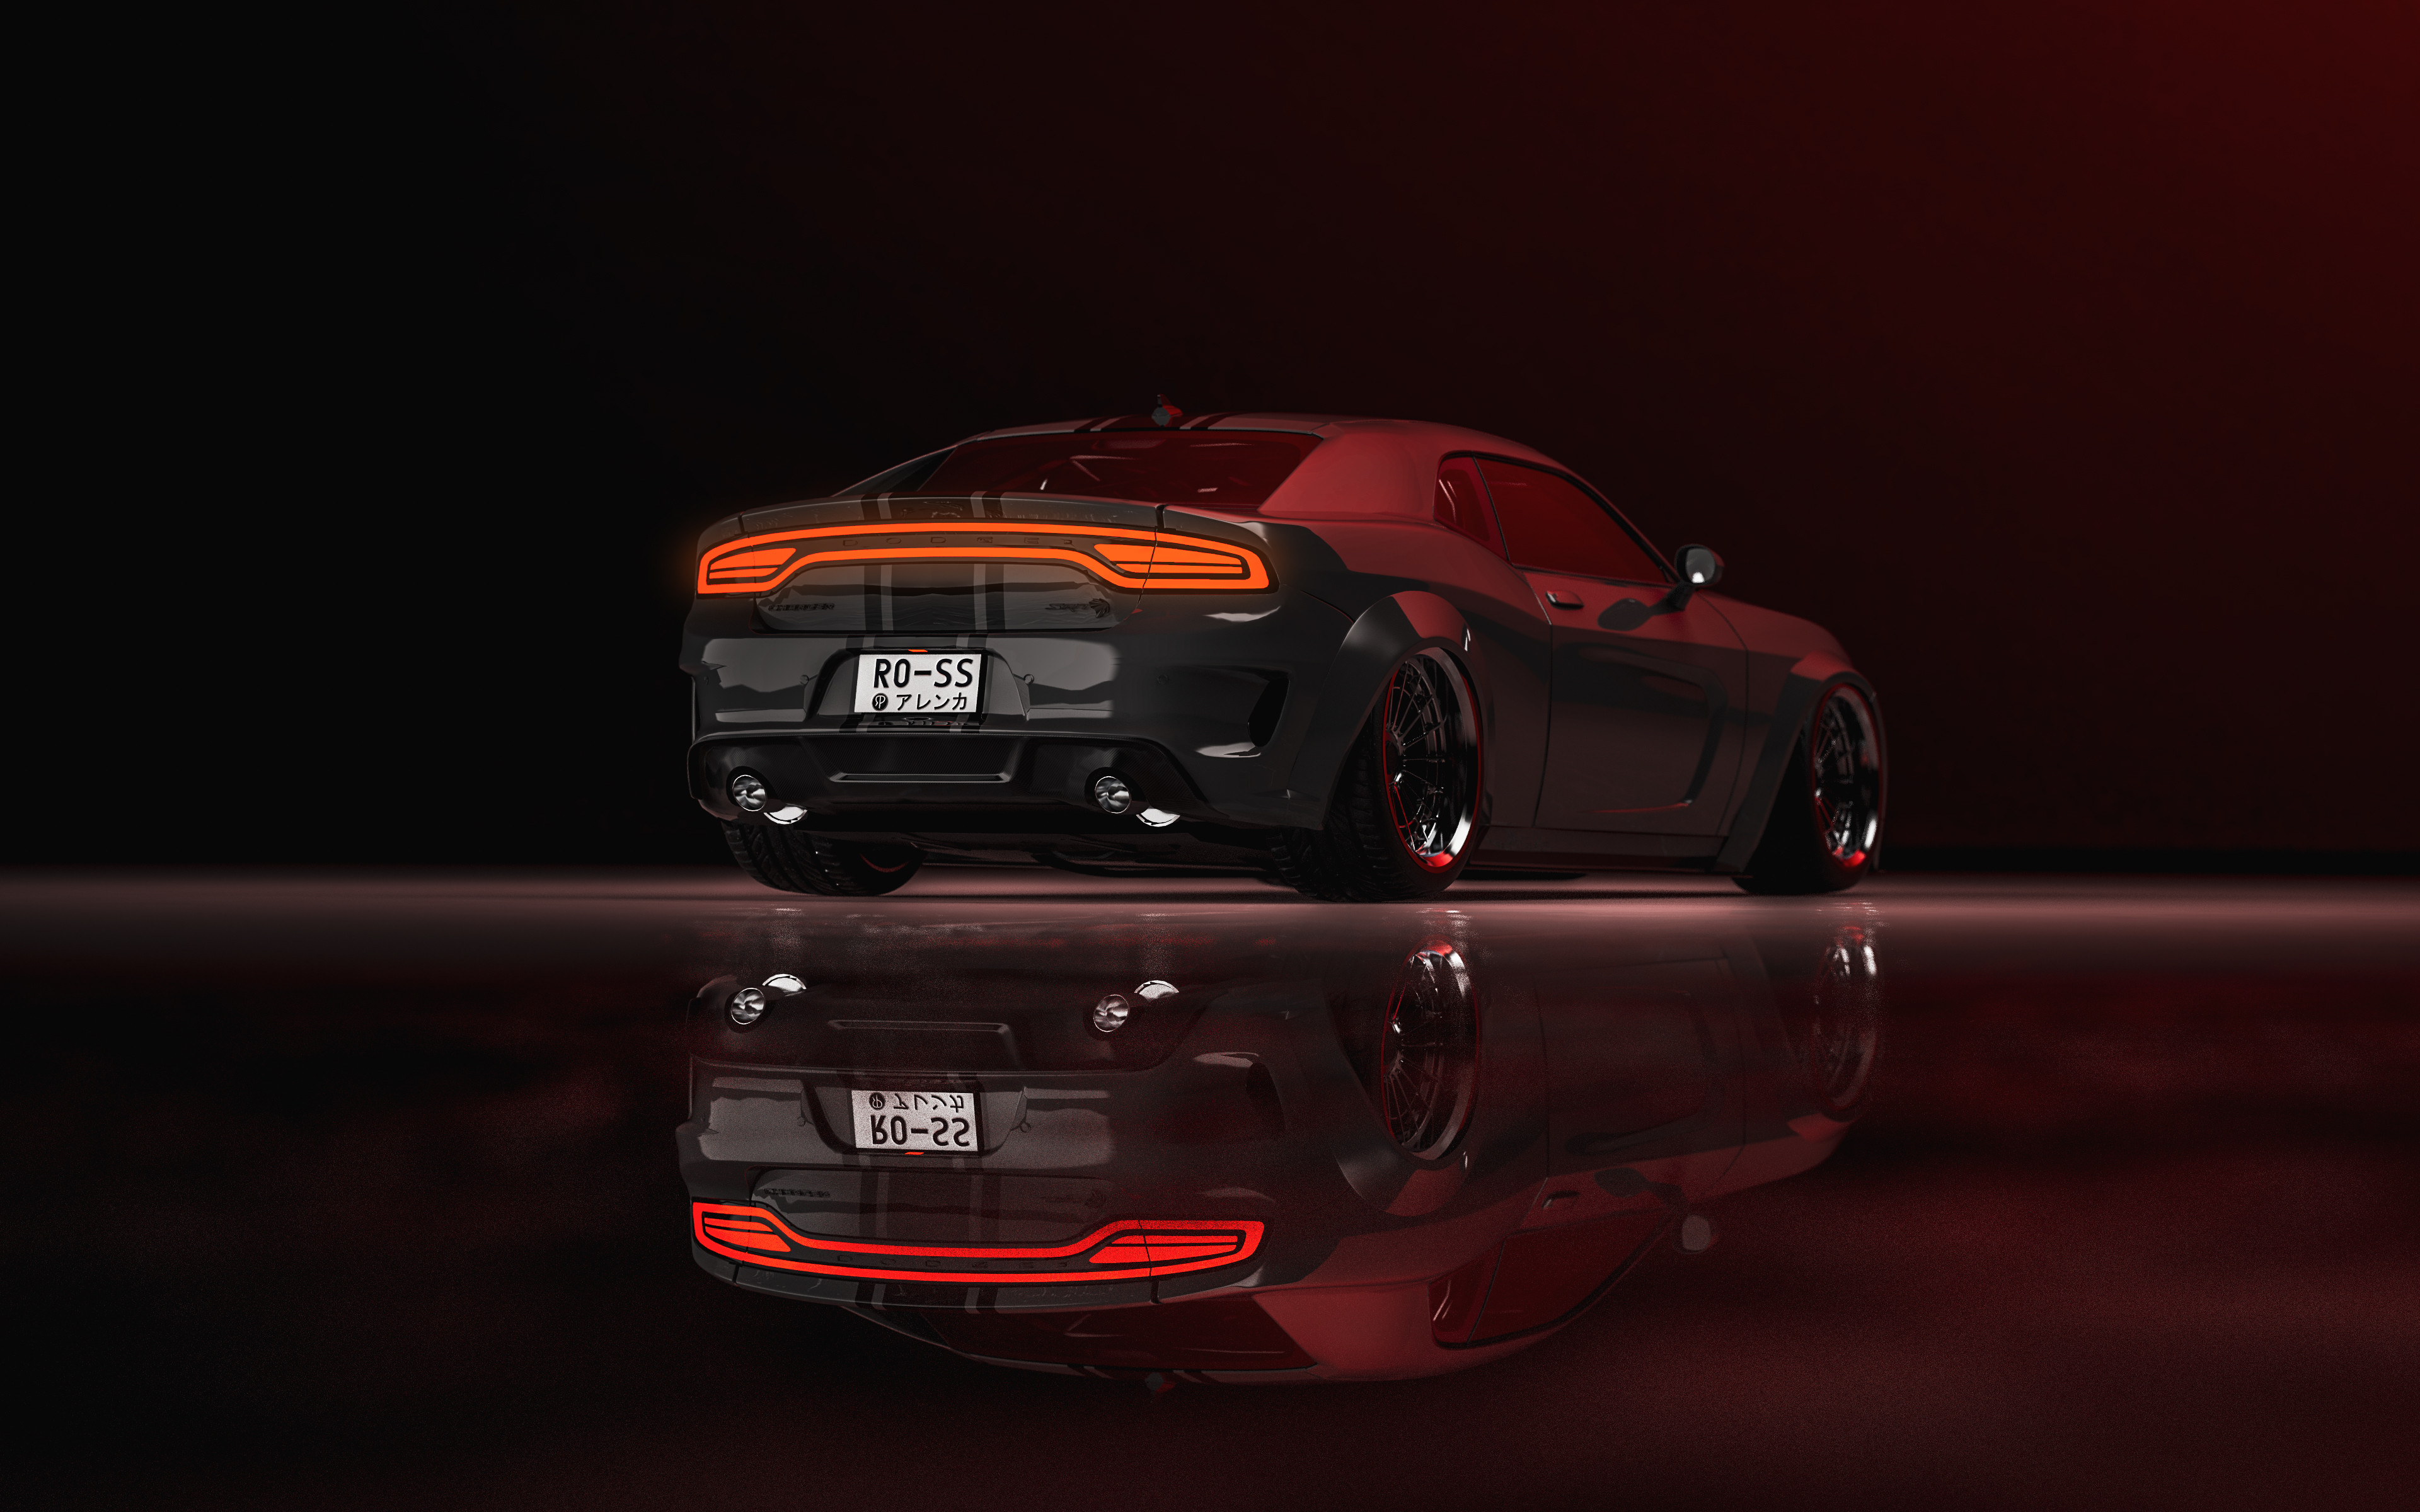 Renderings of the Dodge Charger rear view image